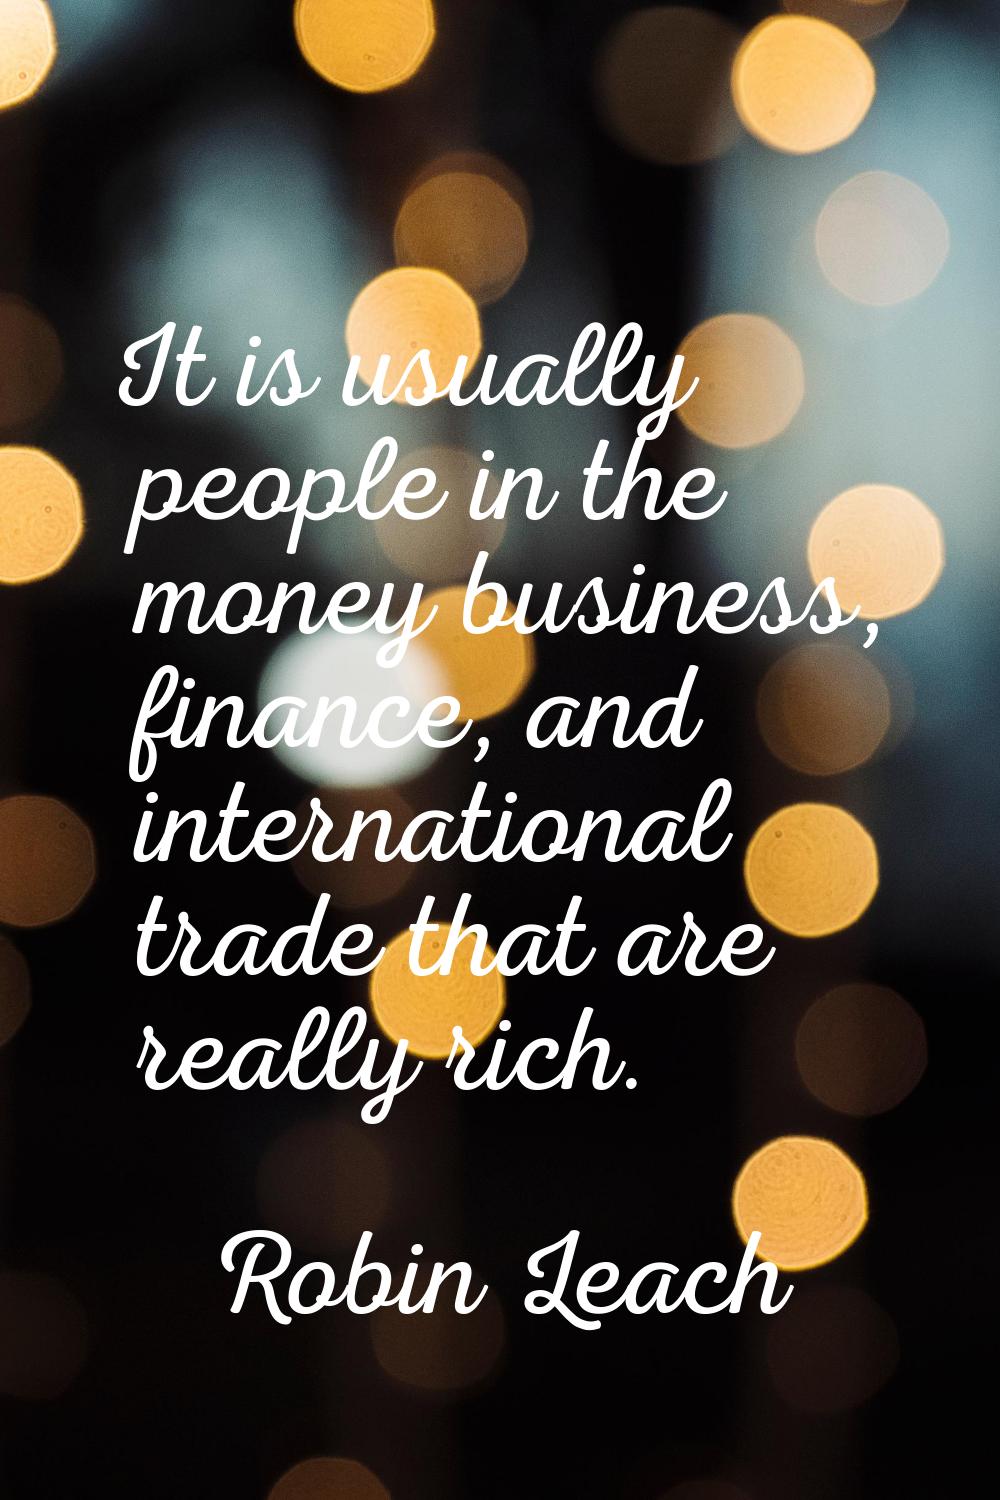 It is usually people in the money business, finance, and international trade that are really rich.